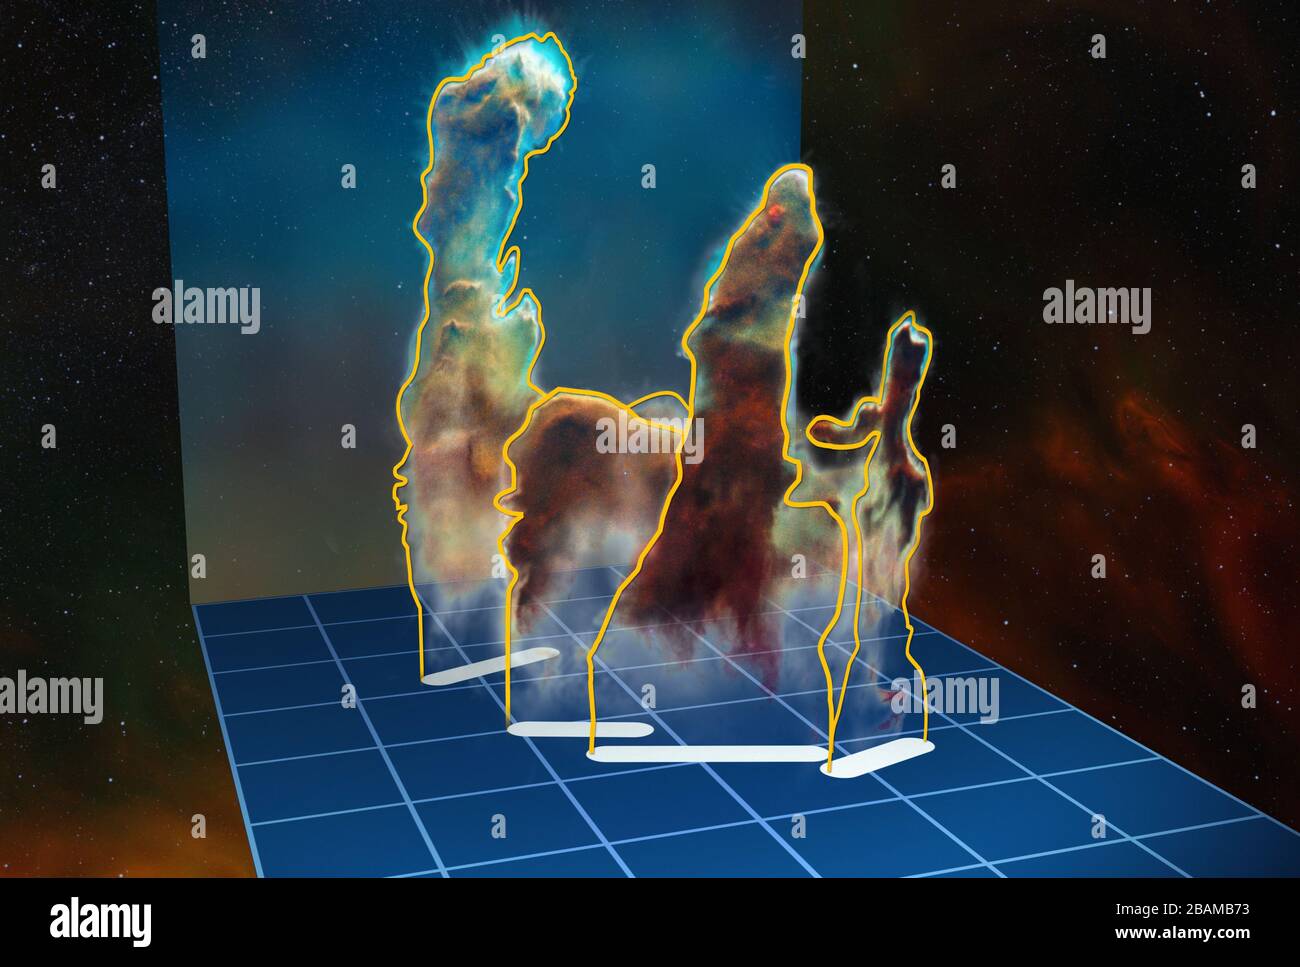 'English: This visualisation of the three-dimensional structure of the Pillars of Creation within the star formation region Messier 16 (also called the Eagle Nebula) is based on new observations of the object using the MUSE instrument on ESO’s Very Large Telescope in Chile. The pillars actually consist of several distinct pieces on either side of the star cluster NGC 6611. In this illustration, the relative distance between the pillars along the line of sight is not to scale. Français : Cette représentation de la structure tri-dimensionnelle des Piliers de la Création au sein de la région de f Stock Photo